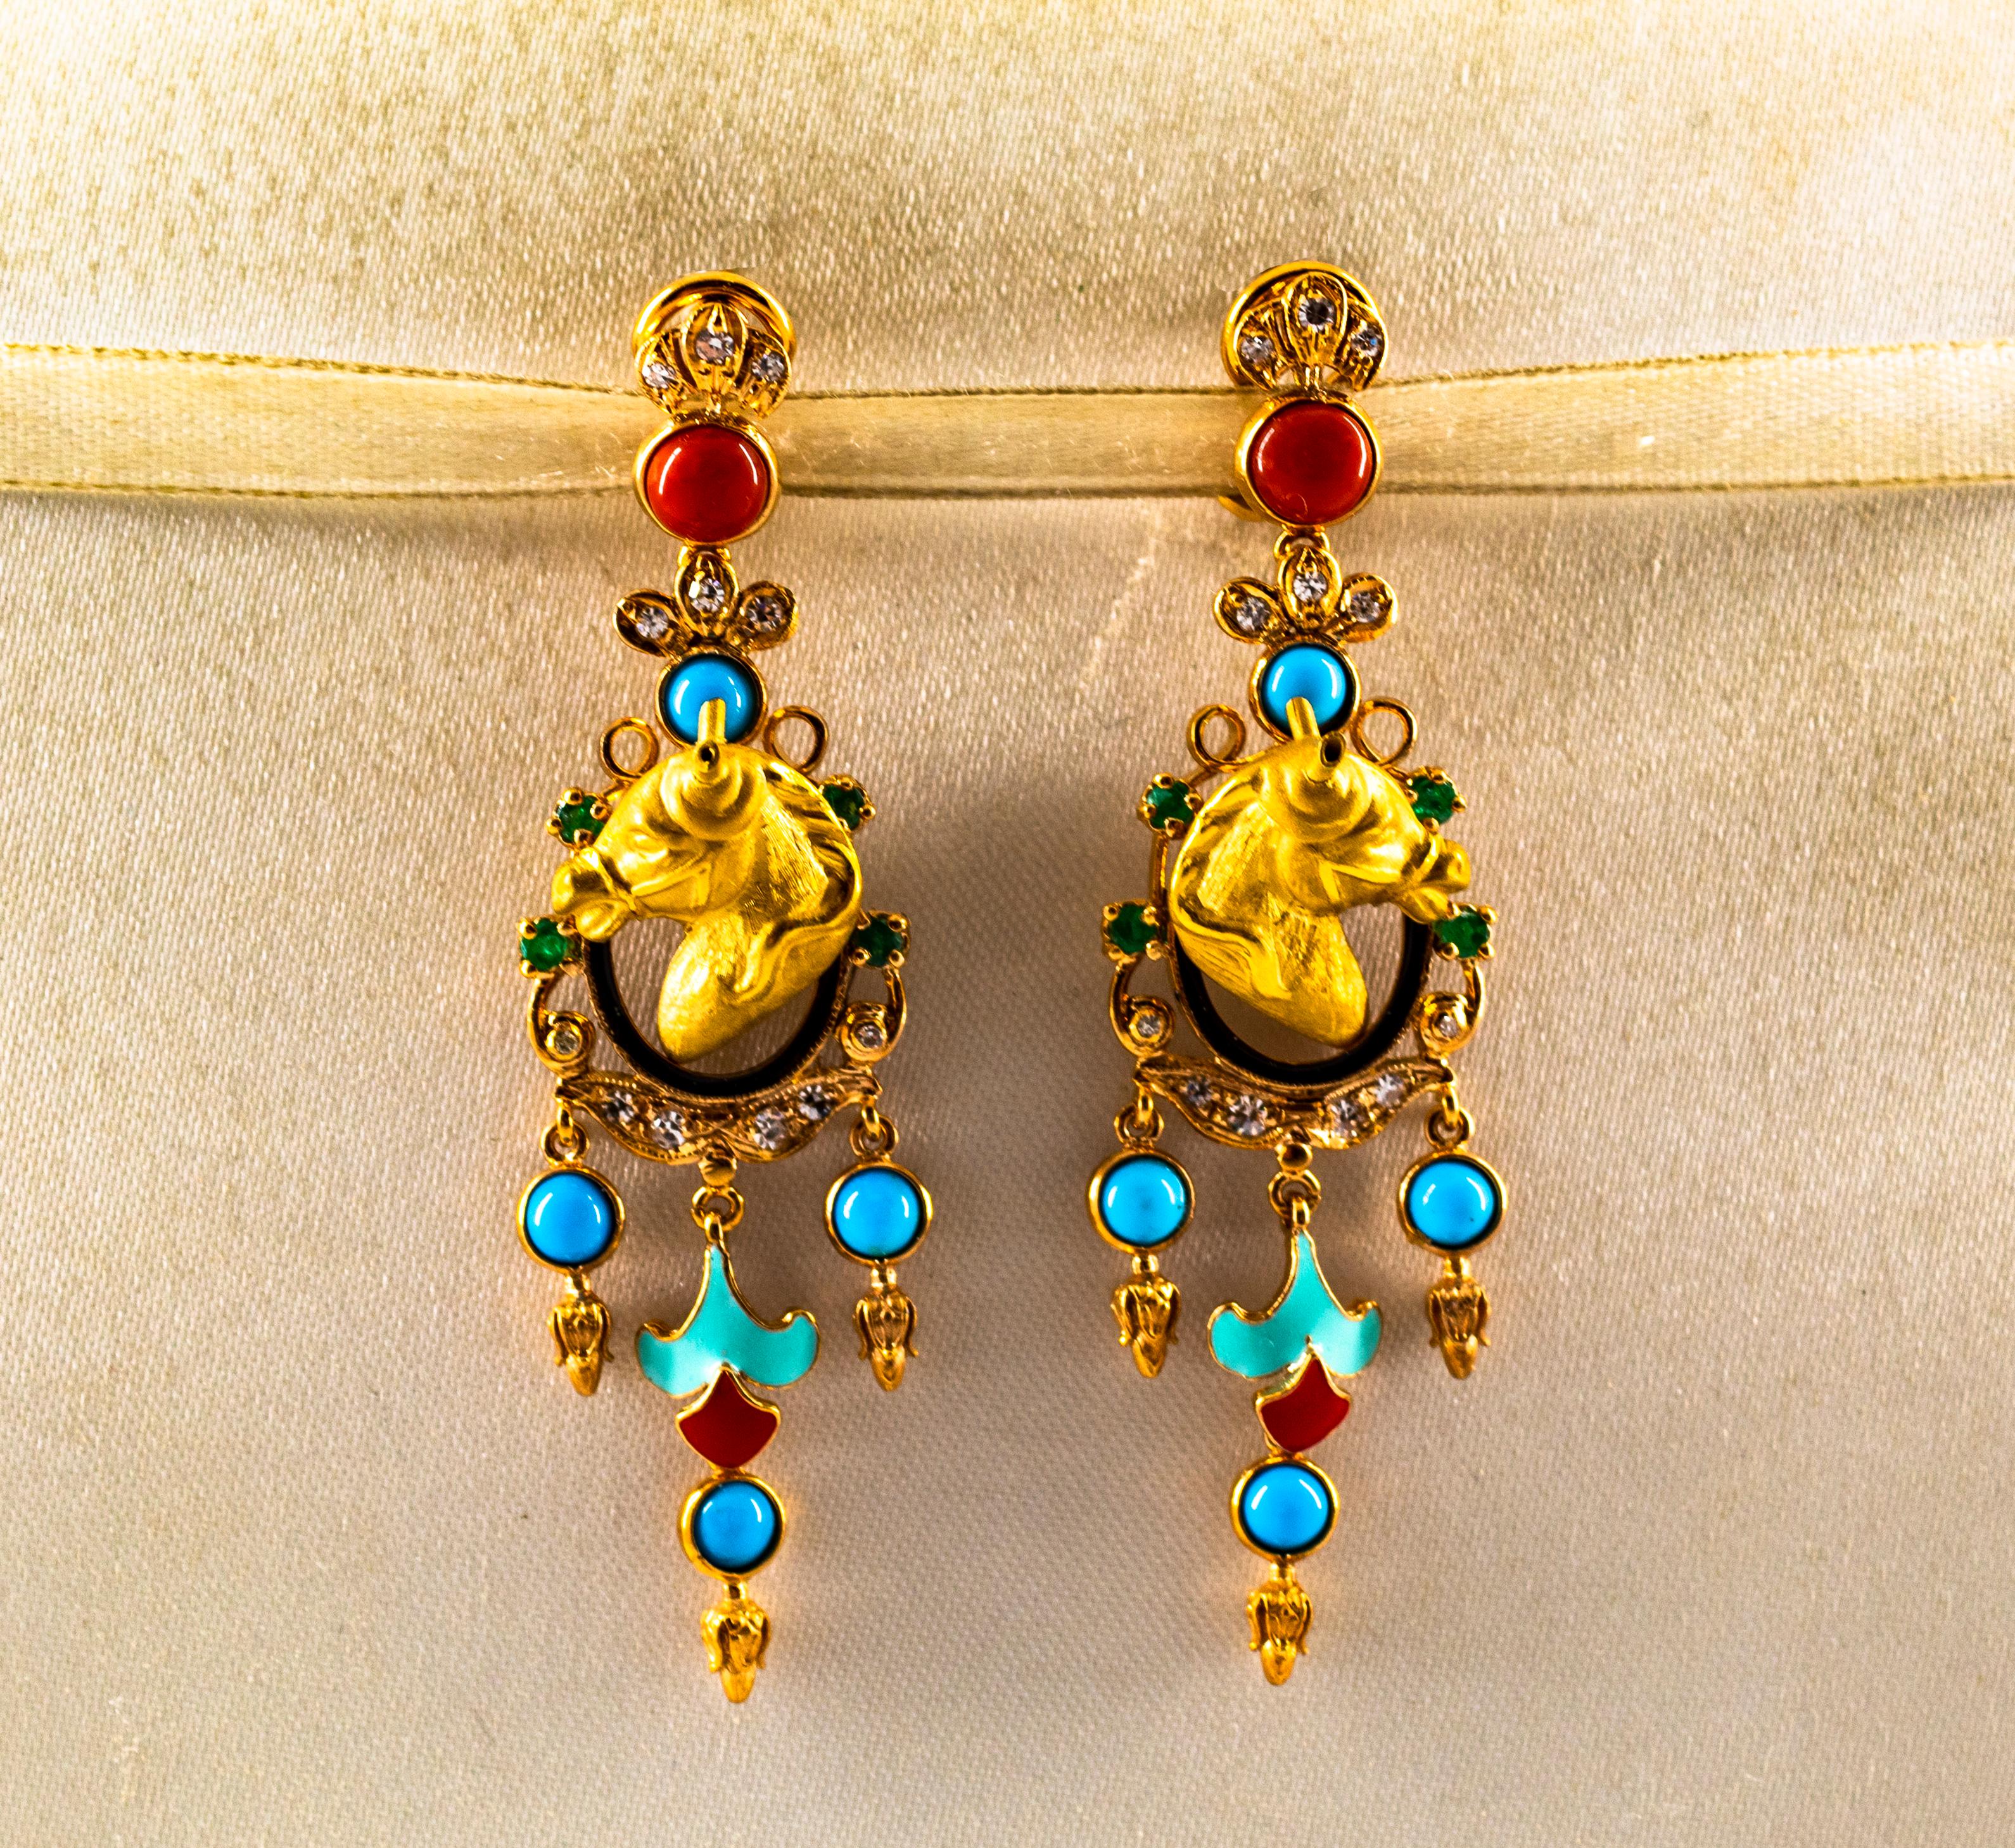 These Earrings are made of 9K Yellow Gold.
These Earrings have 0.40 Carats of White Modern Round Cut Diamonds.
These Earrings have 0.30 Carats of Emeralds.
These Earrings have also Mediterranean (Sardinia, Italy) Red Coral, Turquoise and